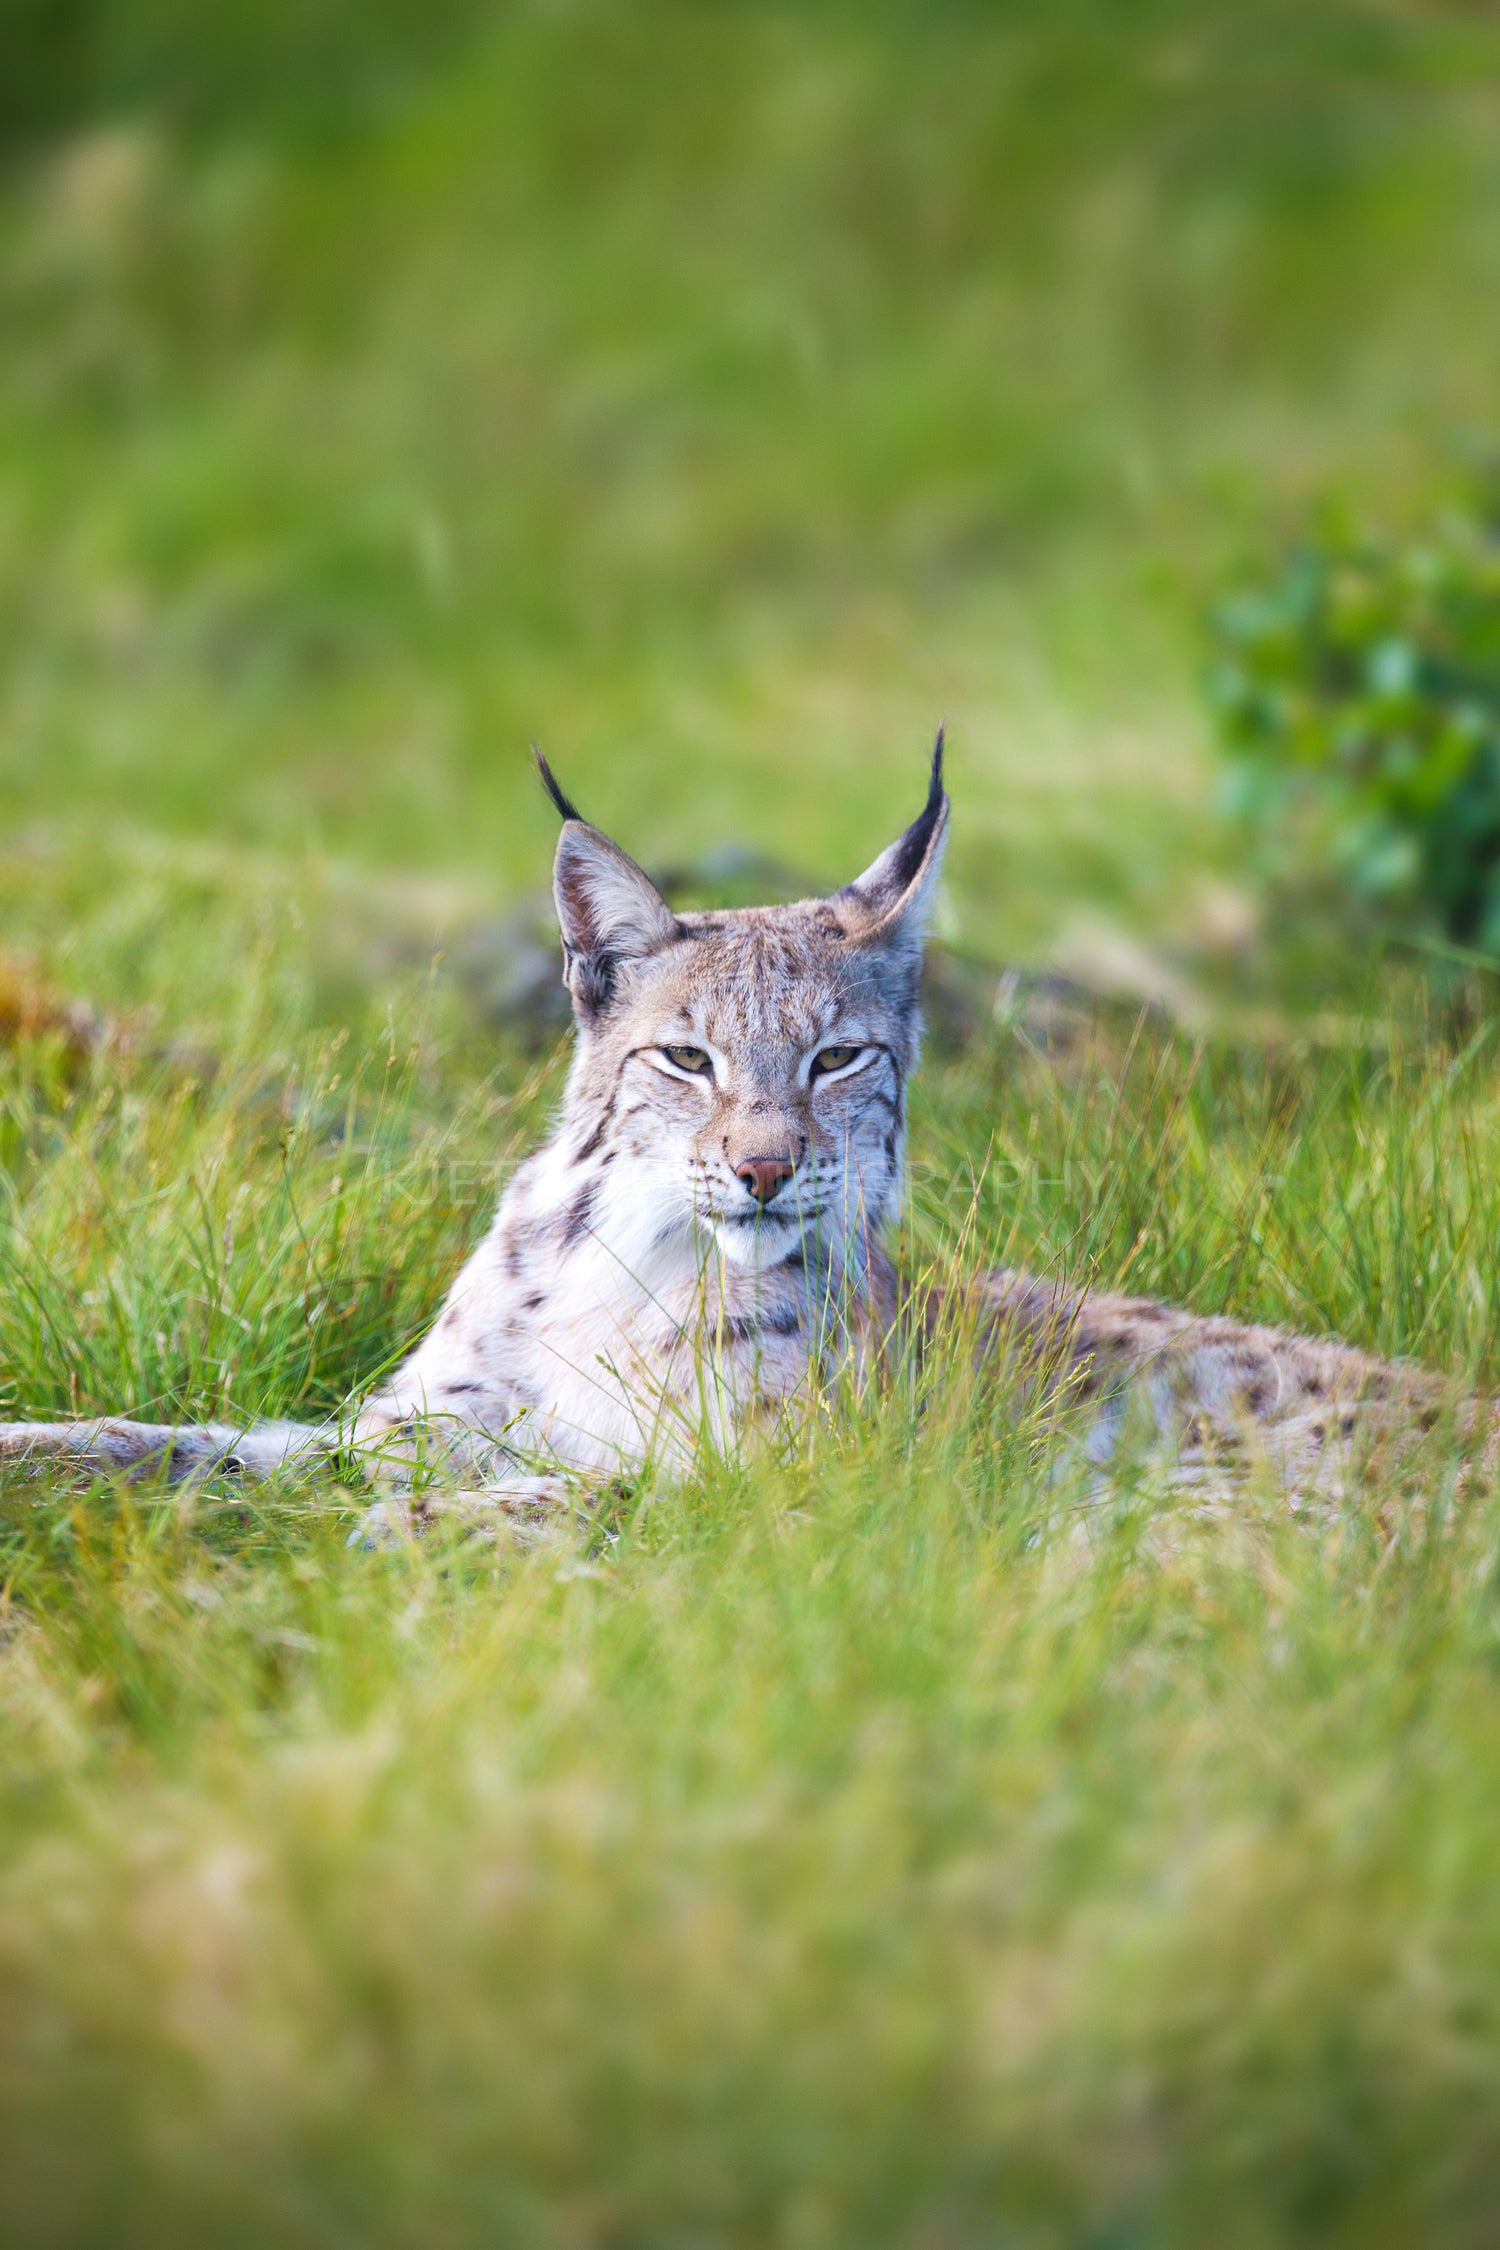 Proud lynx in the grass